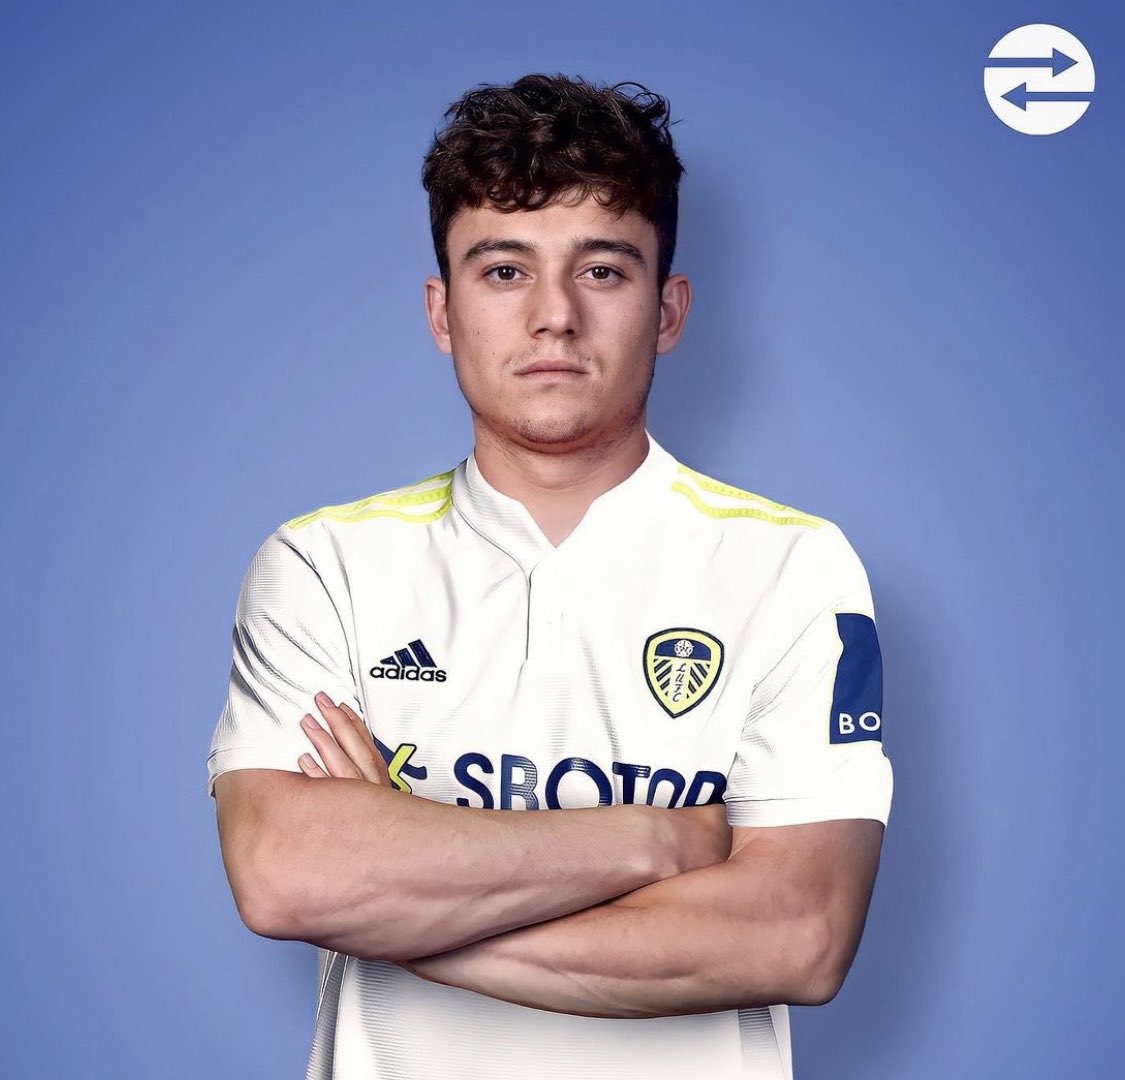 TOTTENHAM DISCUSS LOAN DEAL TO SIGN DANIEL JAMES FROM LEEDS UNITED